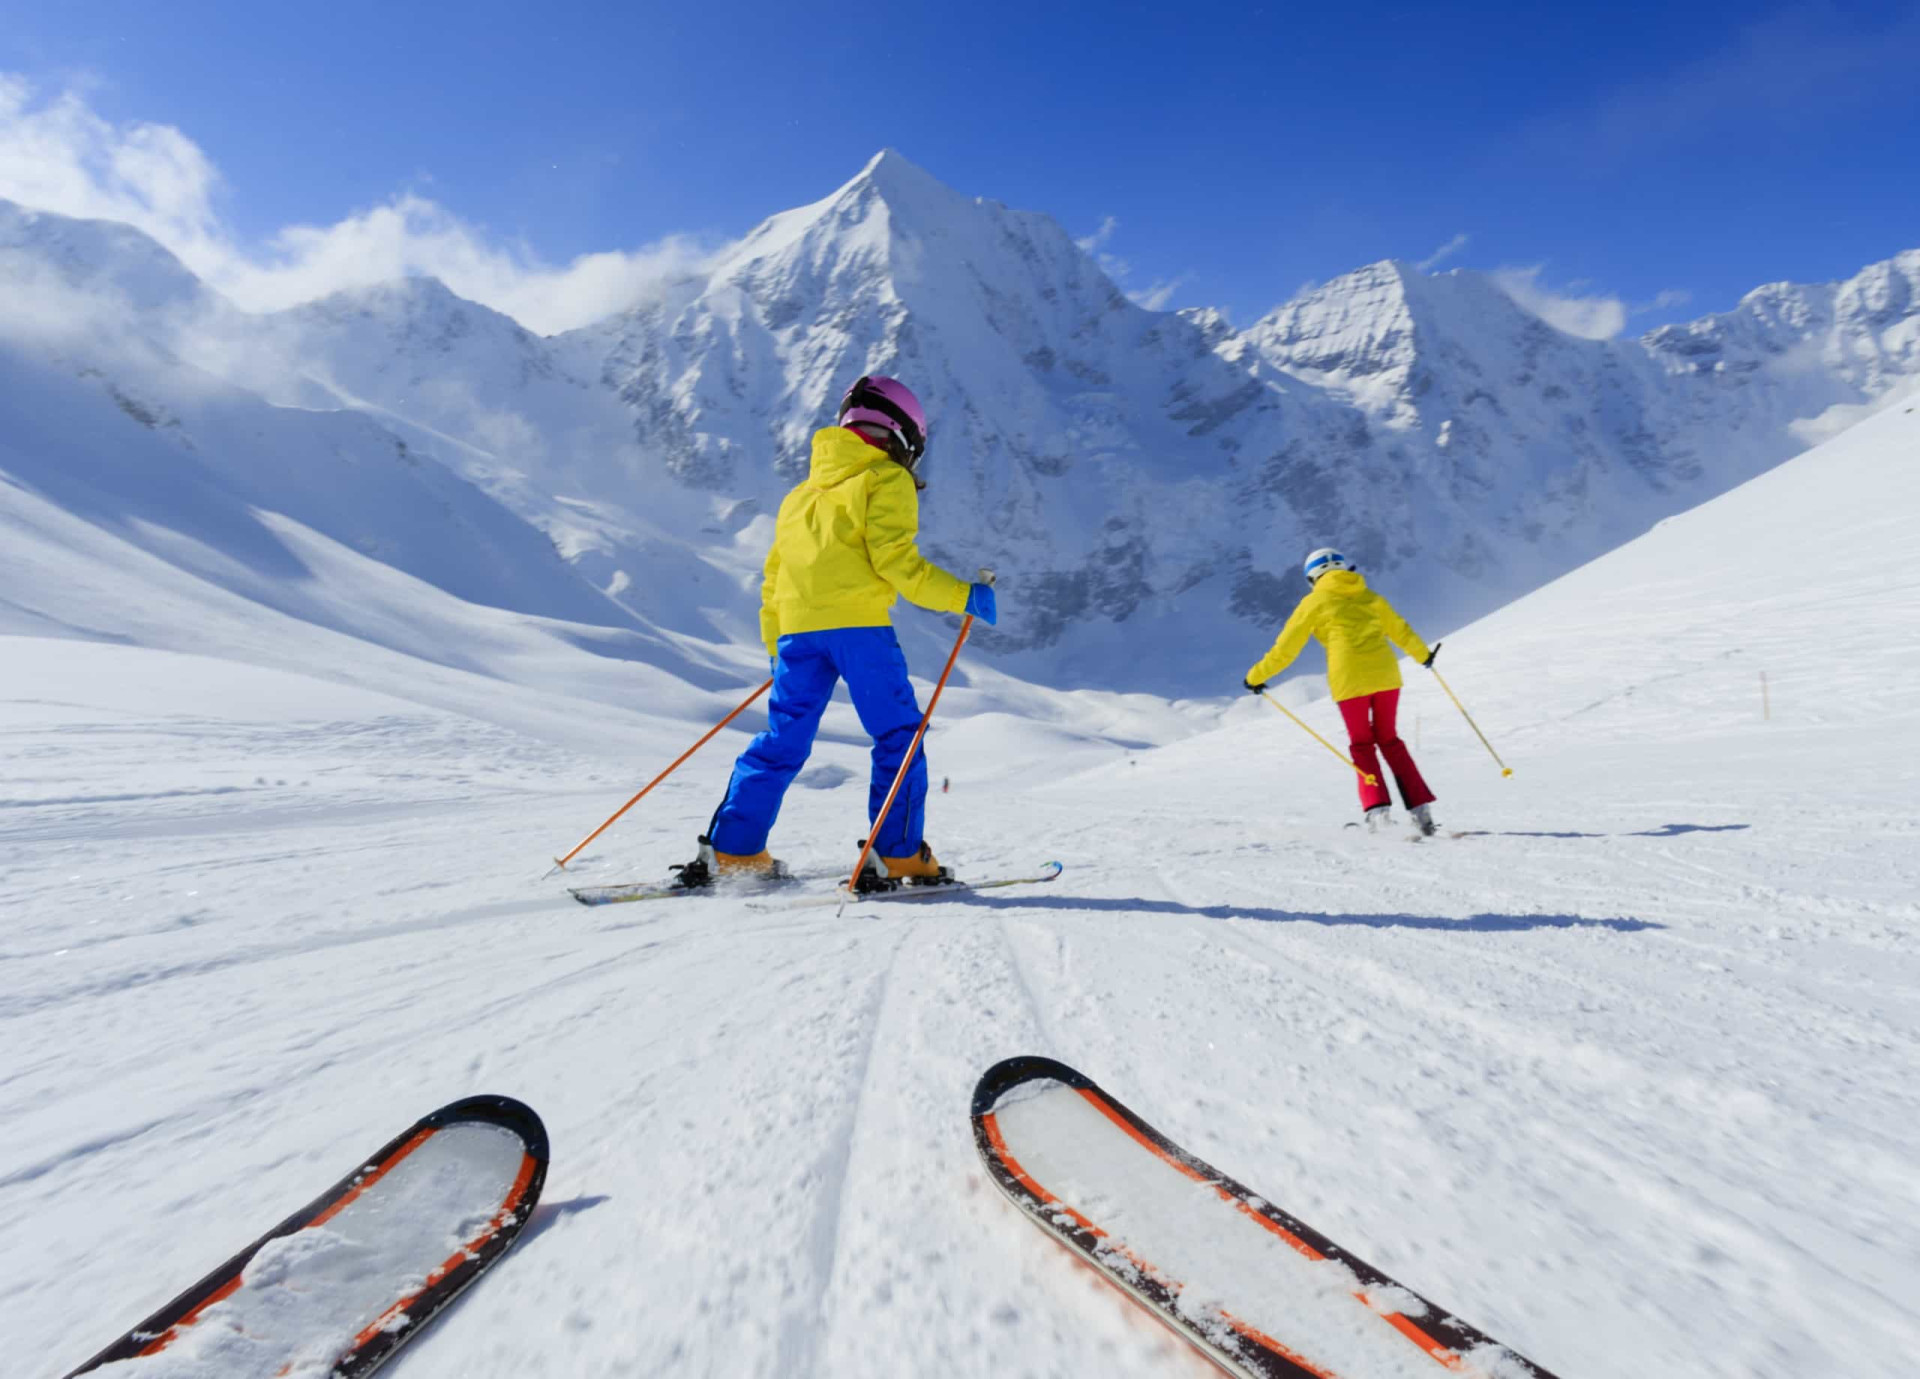 <p>The mountains are your home, and this job can take you to world-class resorts around the globe.</p><p>You may also like:<a href="https://www.starsinsider.com/n/192659?utm_source=msn.com&utm_medium=display&utm_campaign=referral_description&utm_content=434684v2en-us"> Tips to live a long and healthy life </a></p>